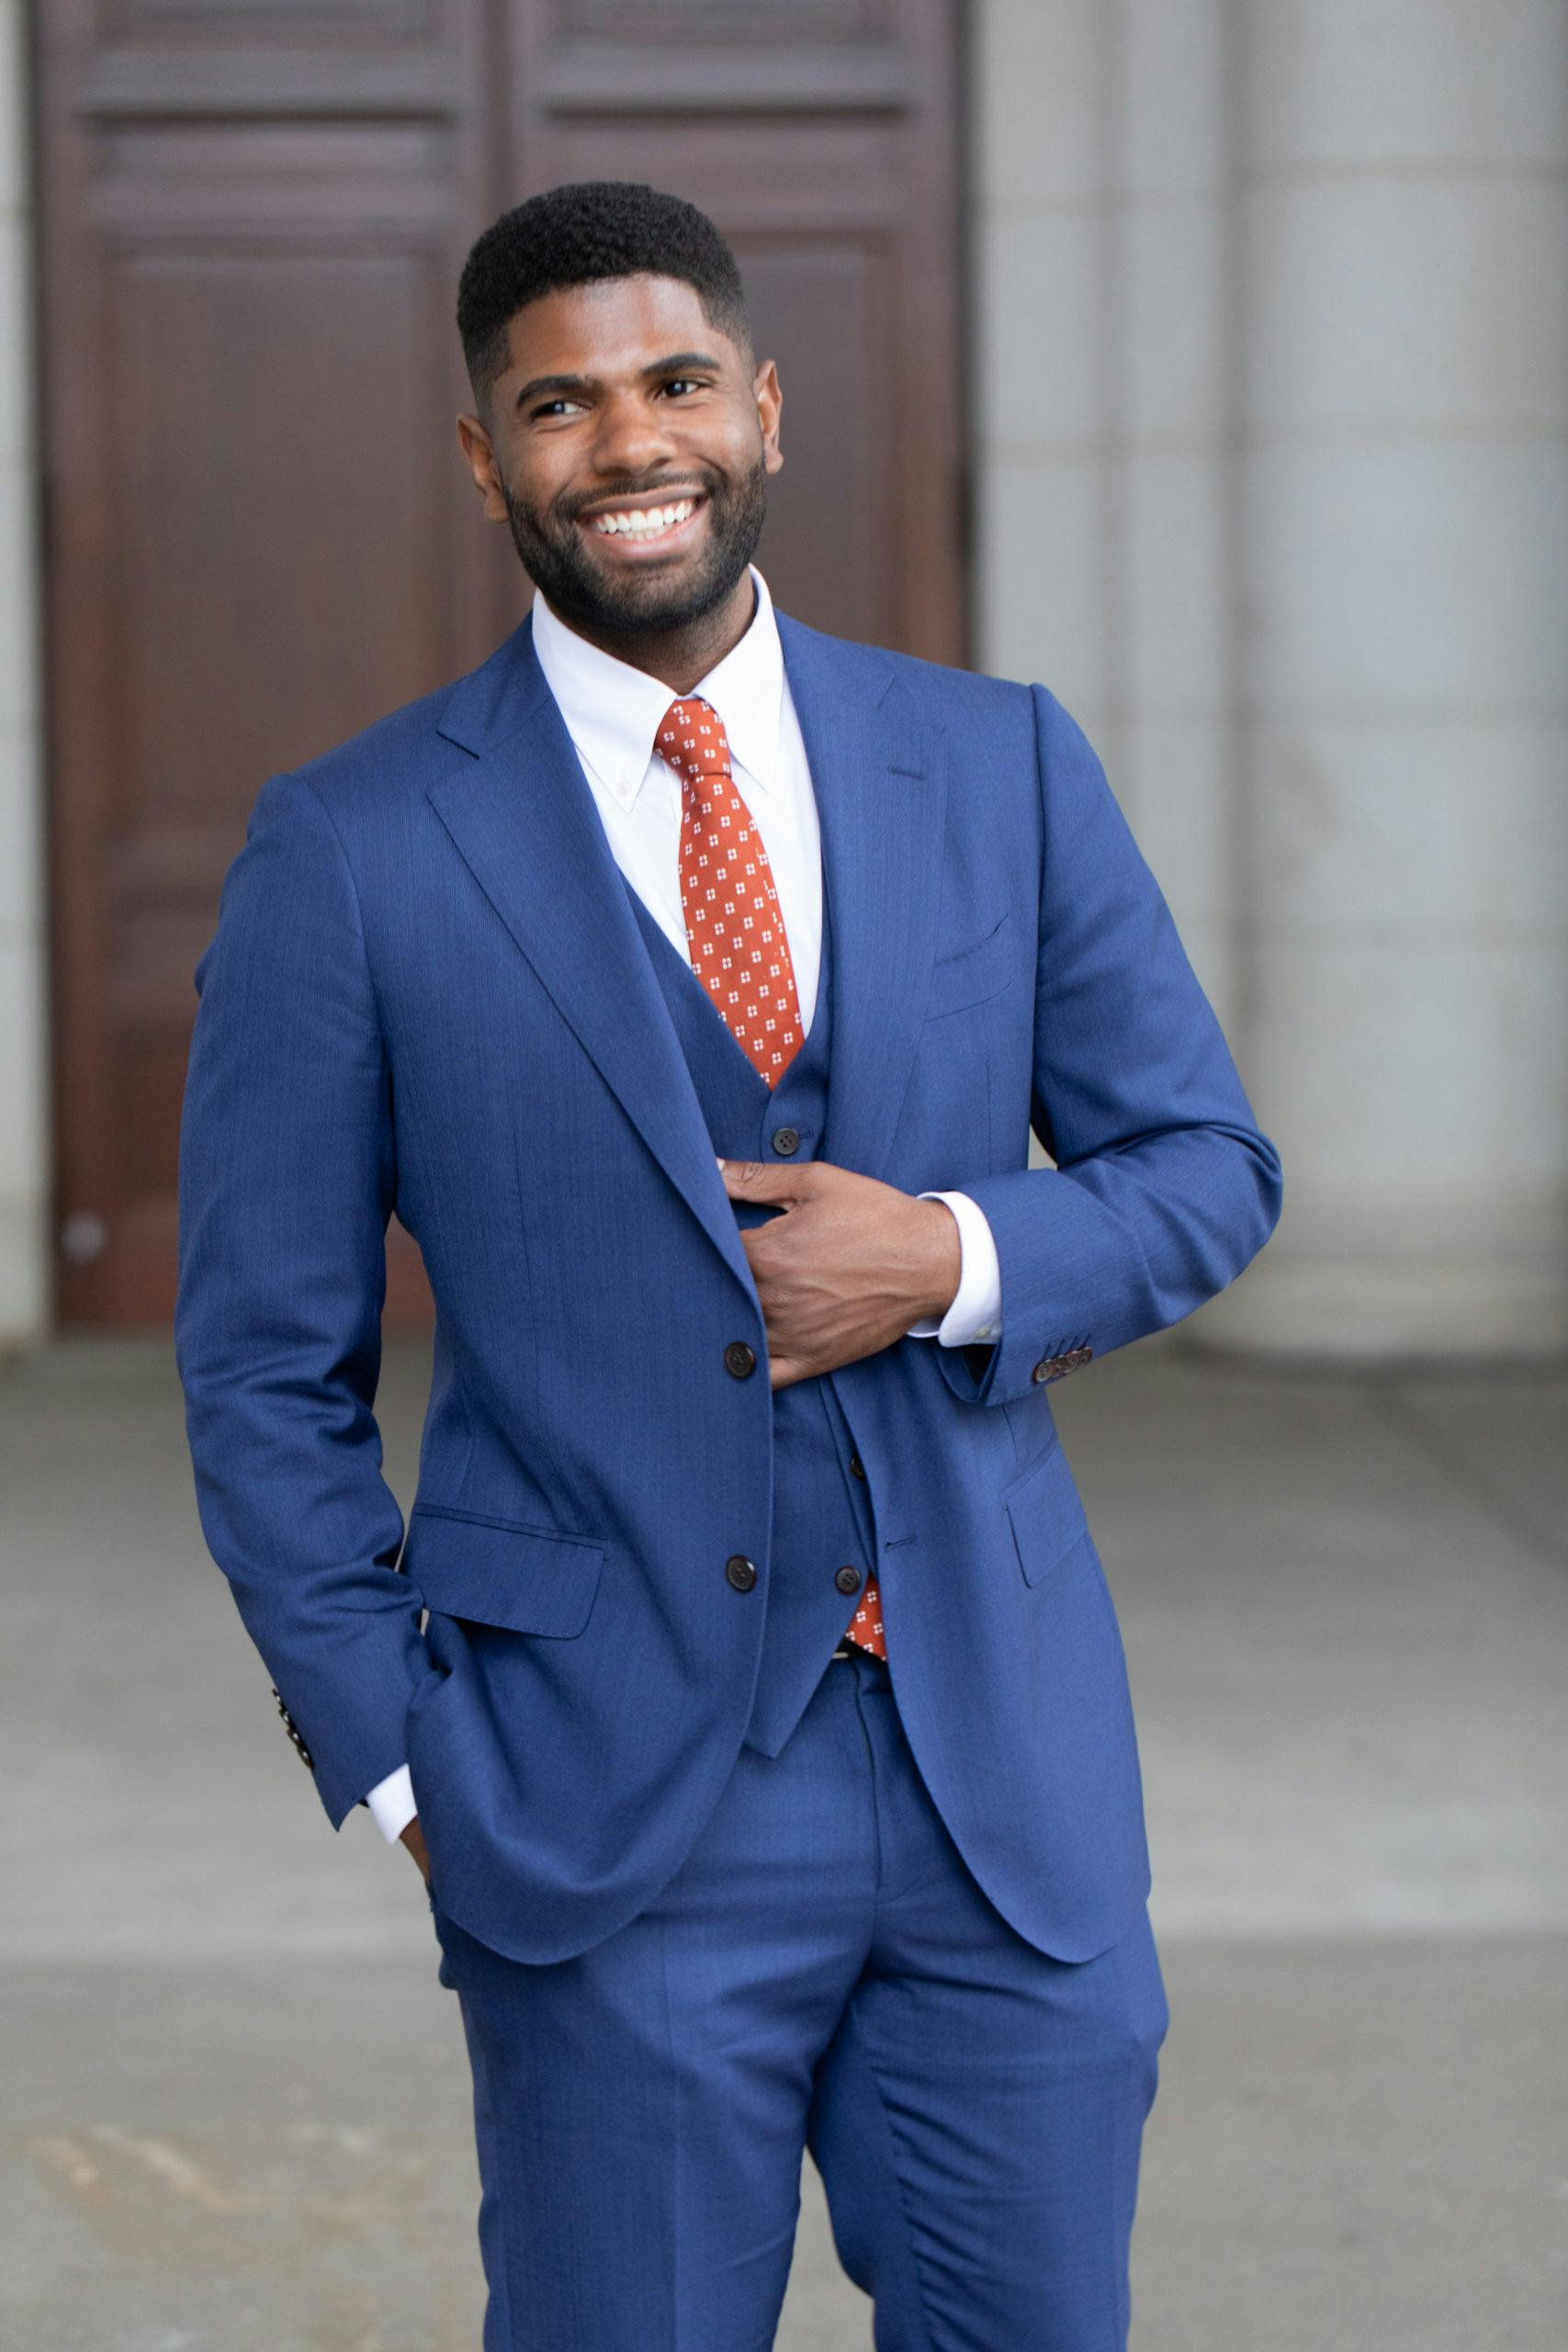 Man in blue blazer and gray dress pants standing on sidewalk during daytime  photo  Free Il Image on Unsplash